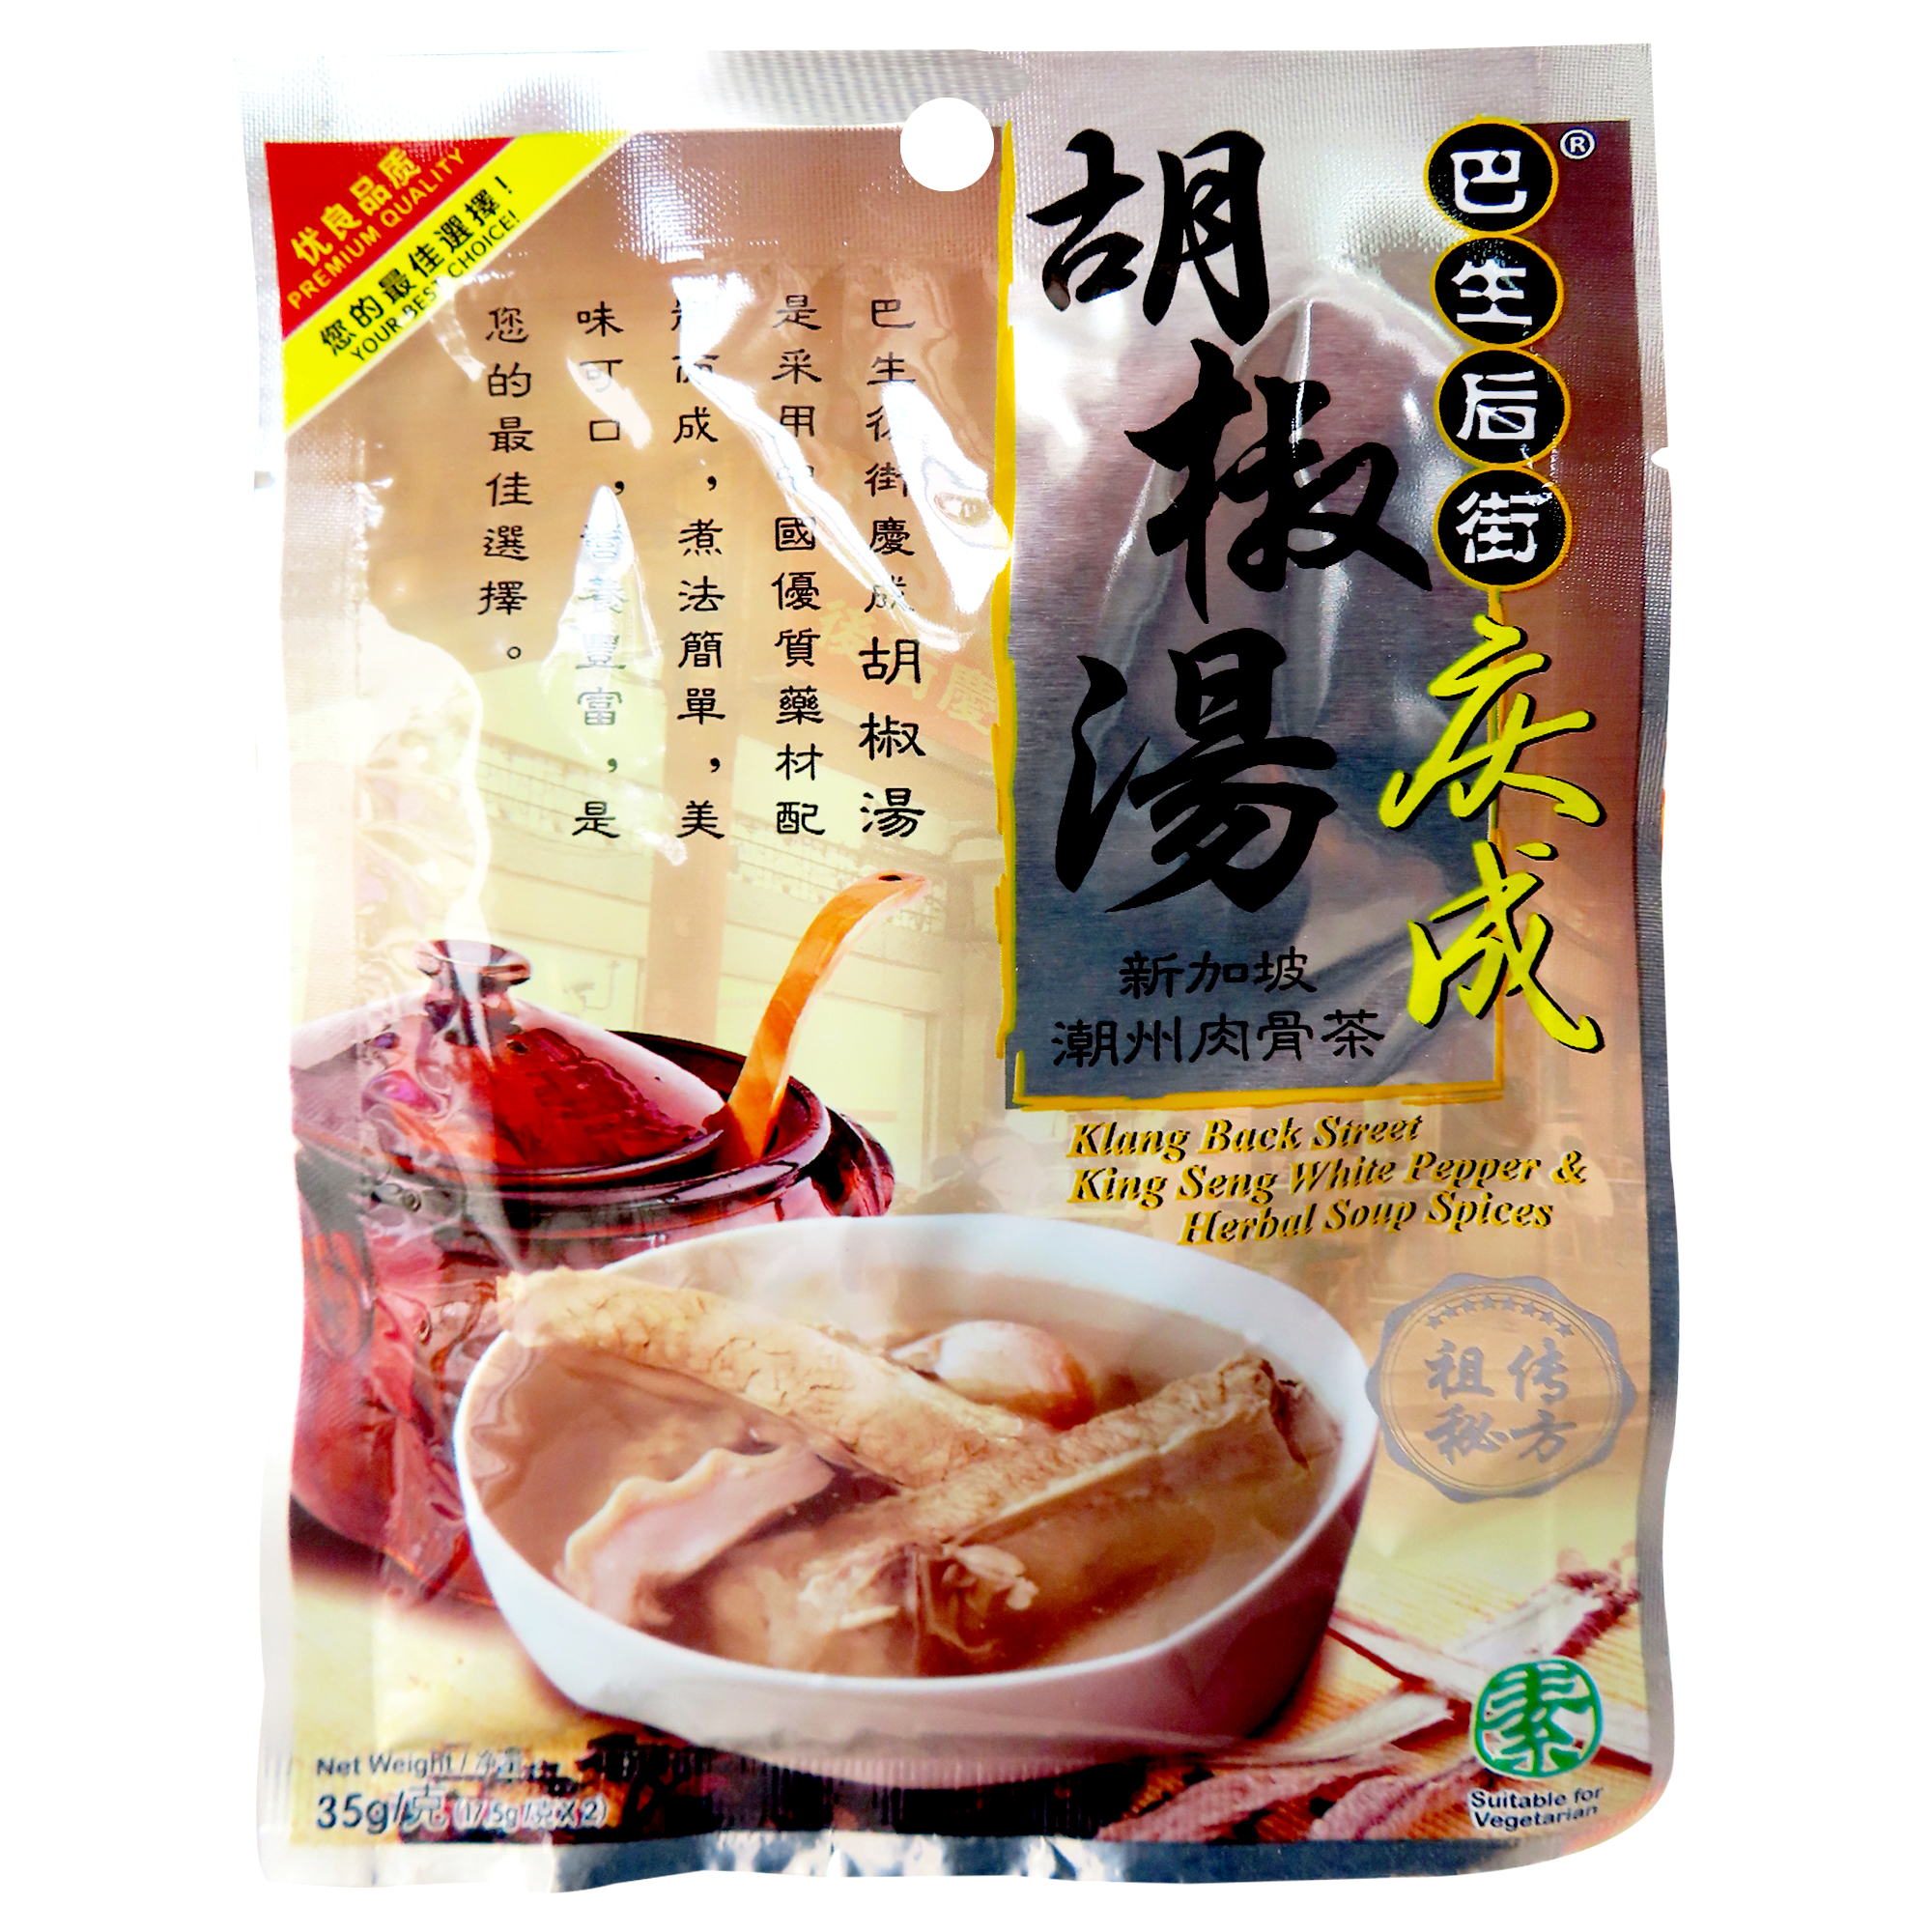 Image White Pepper & Herbal Soup Spices 庆成 - 胡椒汤 35grams